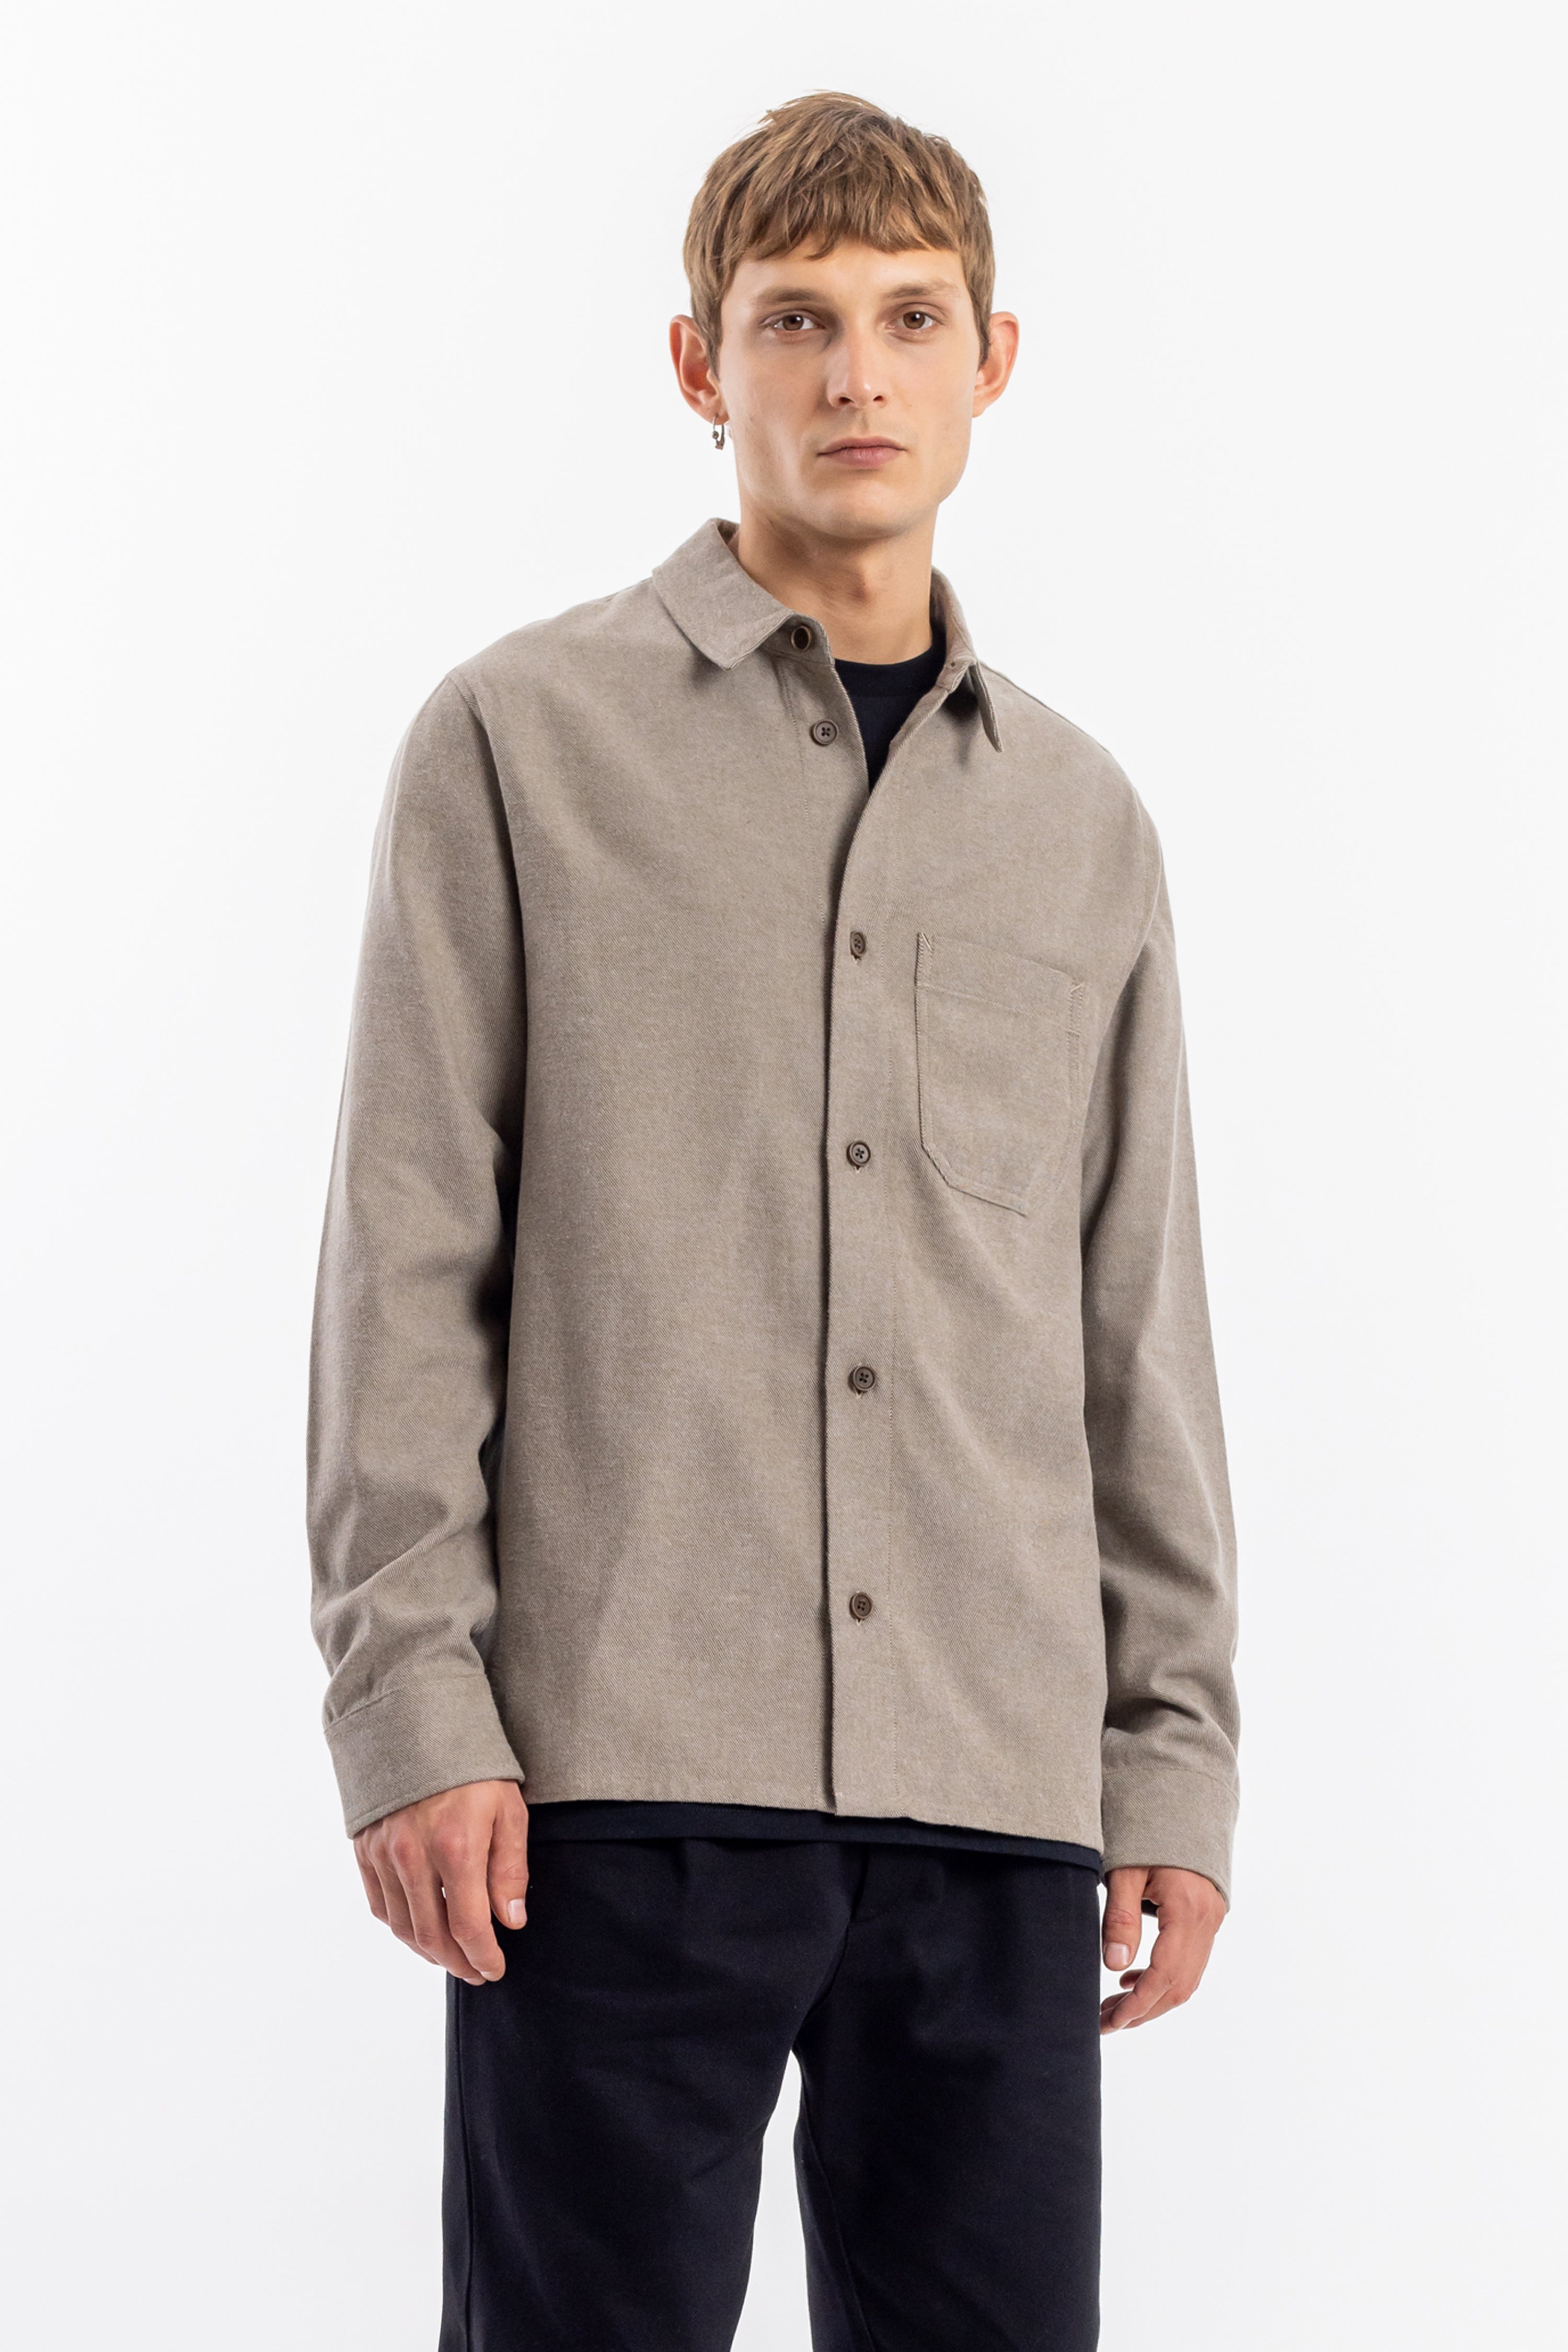 Brown mottled shirt made from 100% organic cotton from Rotholz